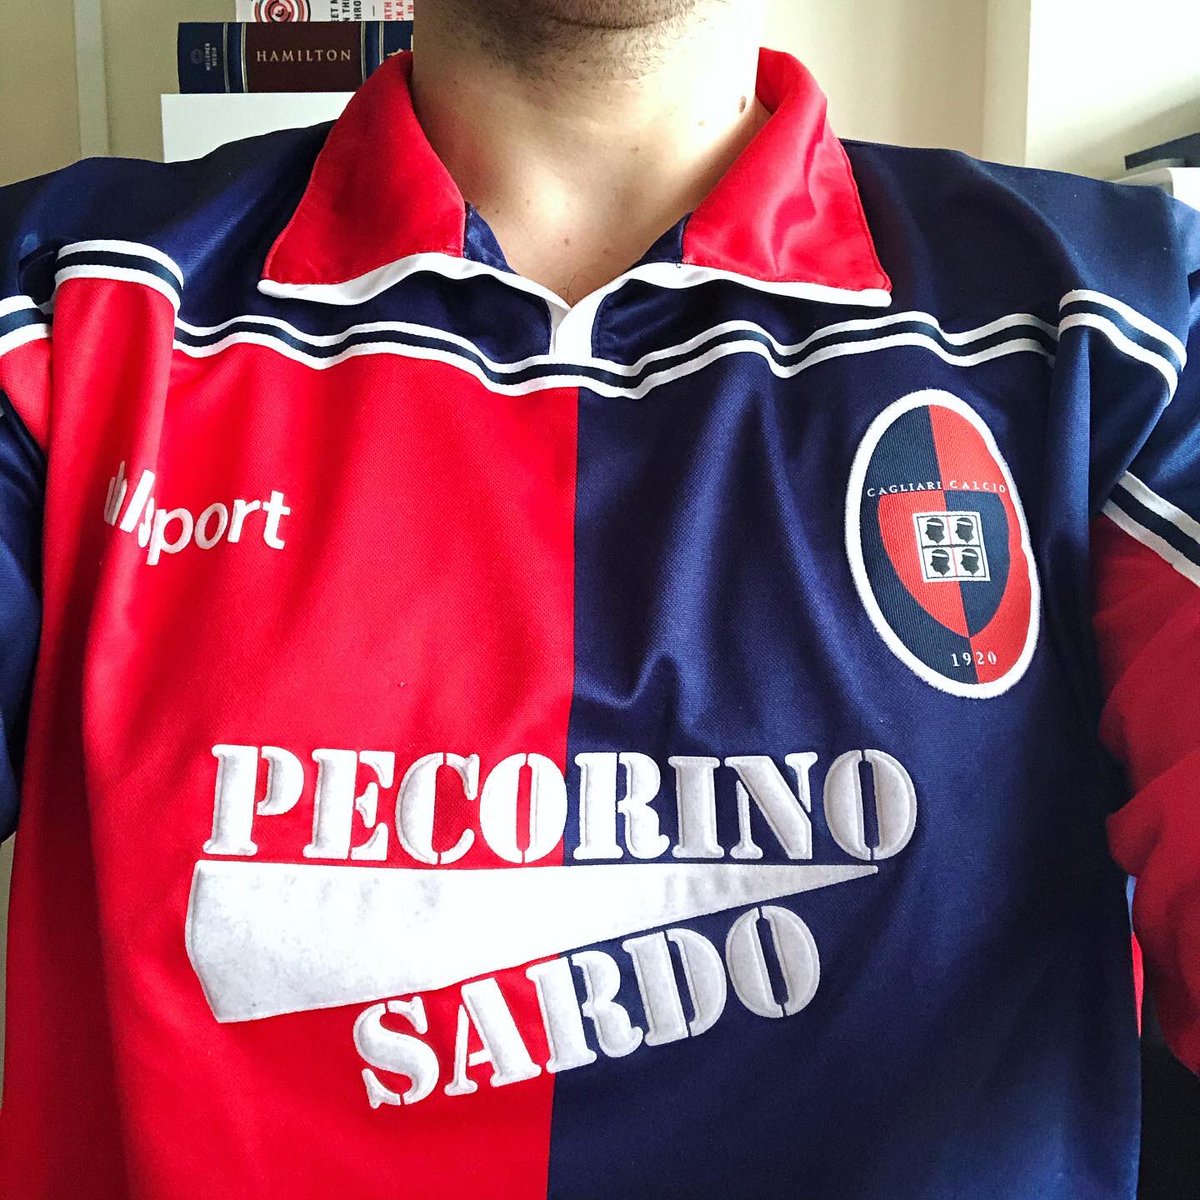 . @CagliariCalcio Home Kit, 2000/01UhlsportPersonalised: 8I’m not so sure why this shirt is so iconic m. It’s true that this shirt is quite similar to the one Cagliari used the year before, when it was relegated from Serie A despite a roster including M’boma, Oliveira, Morfeo